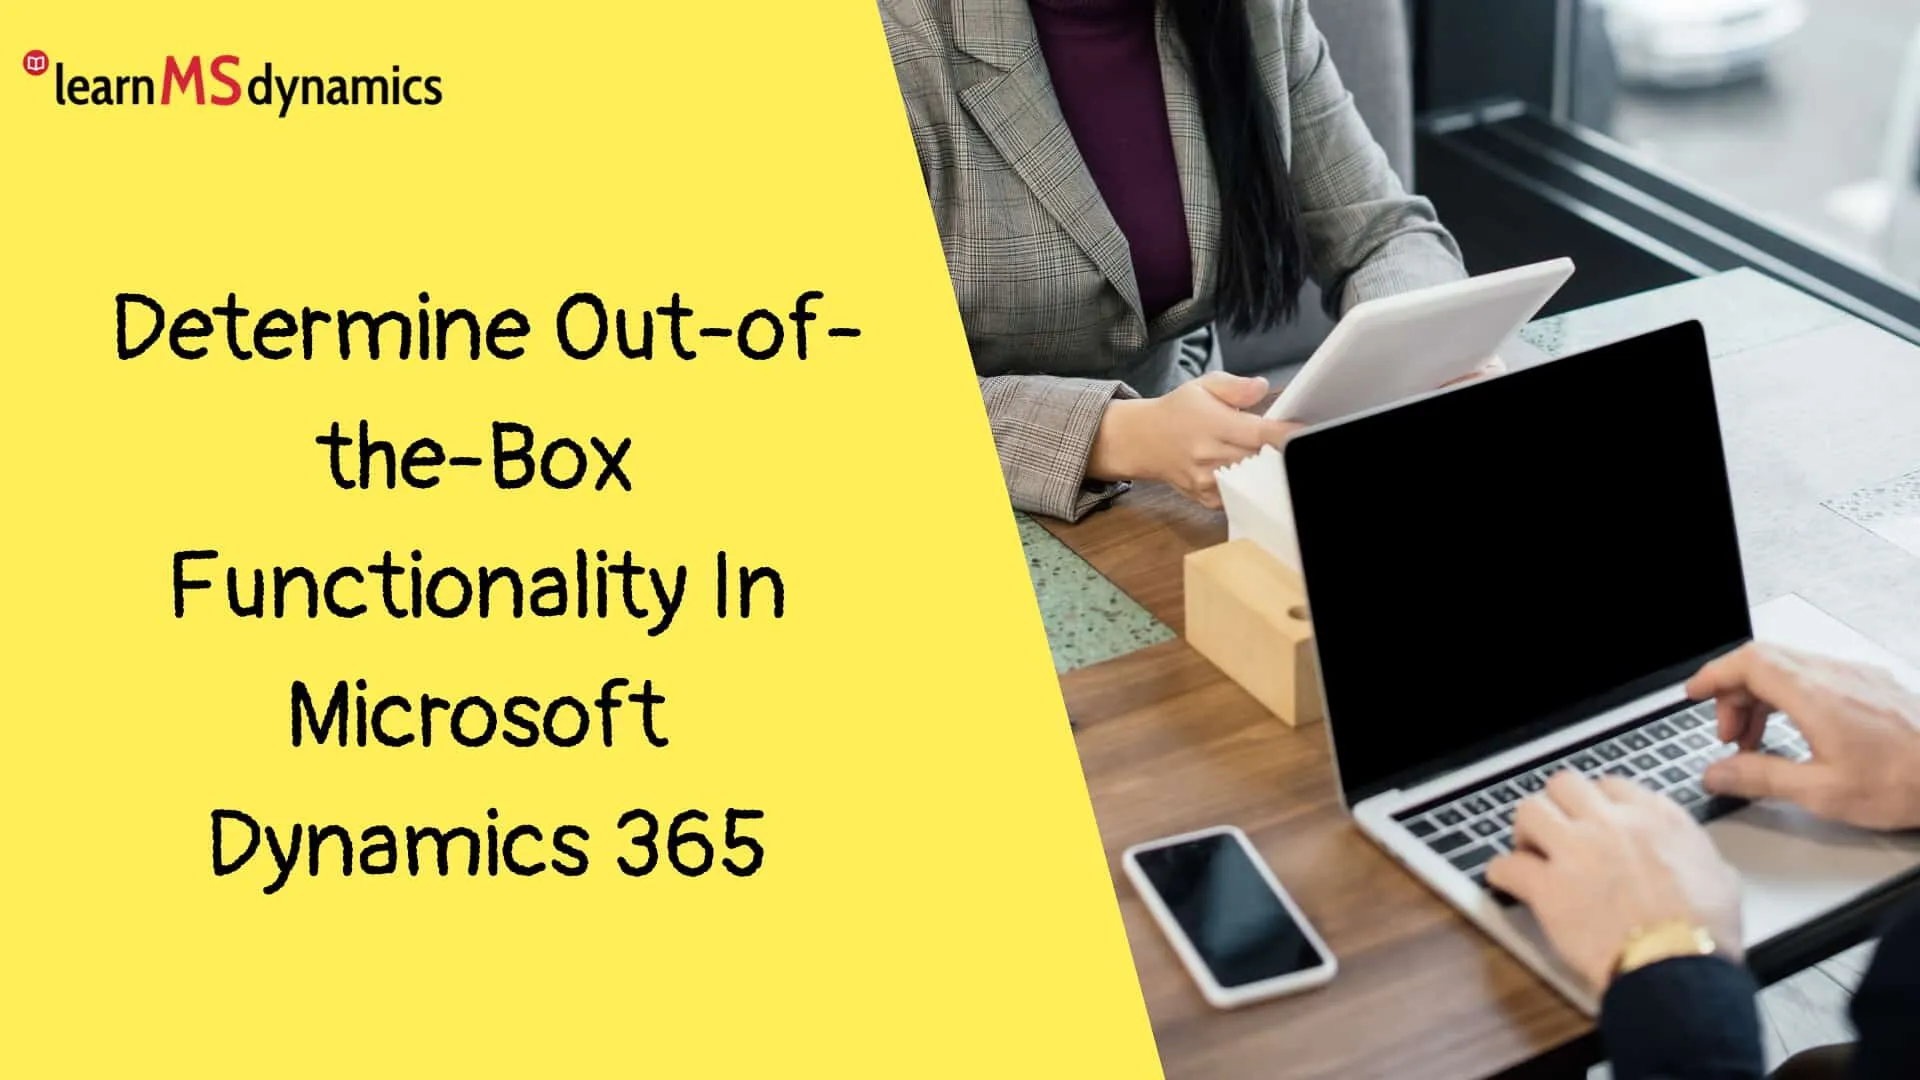 Determine Out-of-the-Box Functionality In Microsoft Dynamics 365